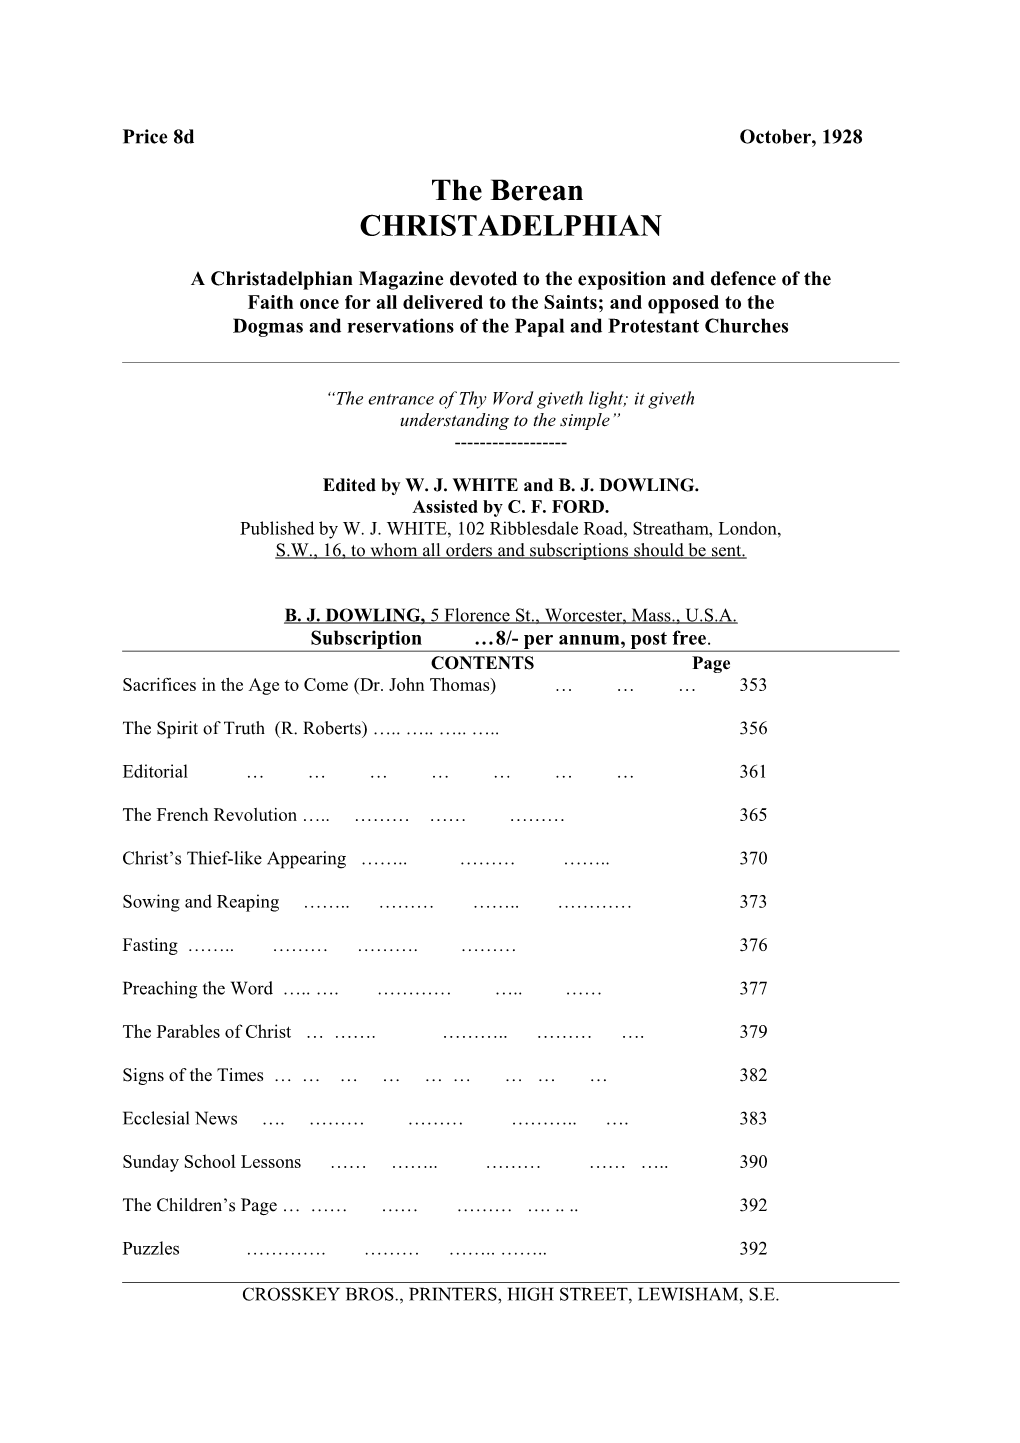 A Christadelphian Magazine Devoted to the Exposition and Defence of The s1